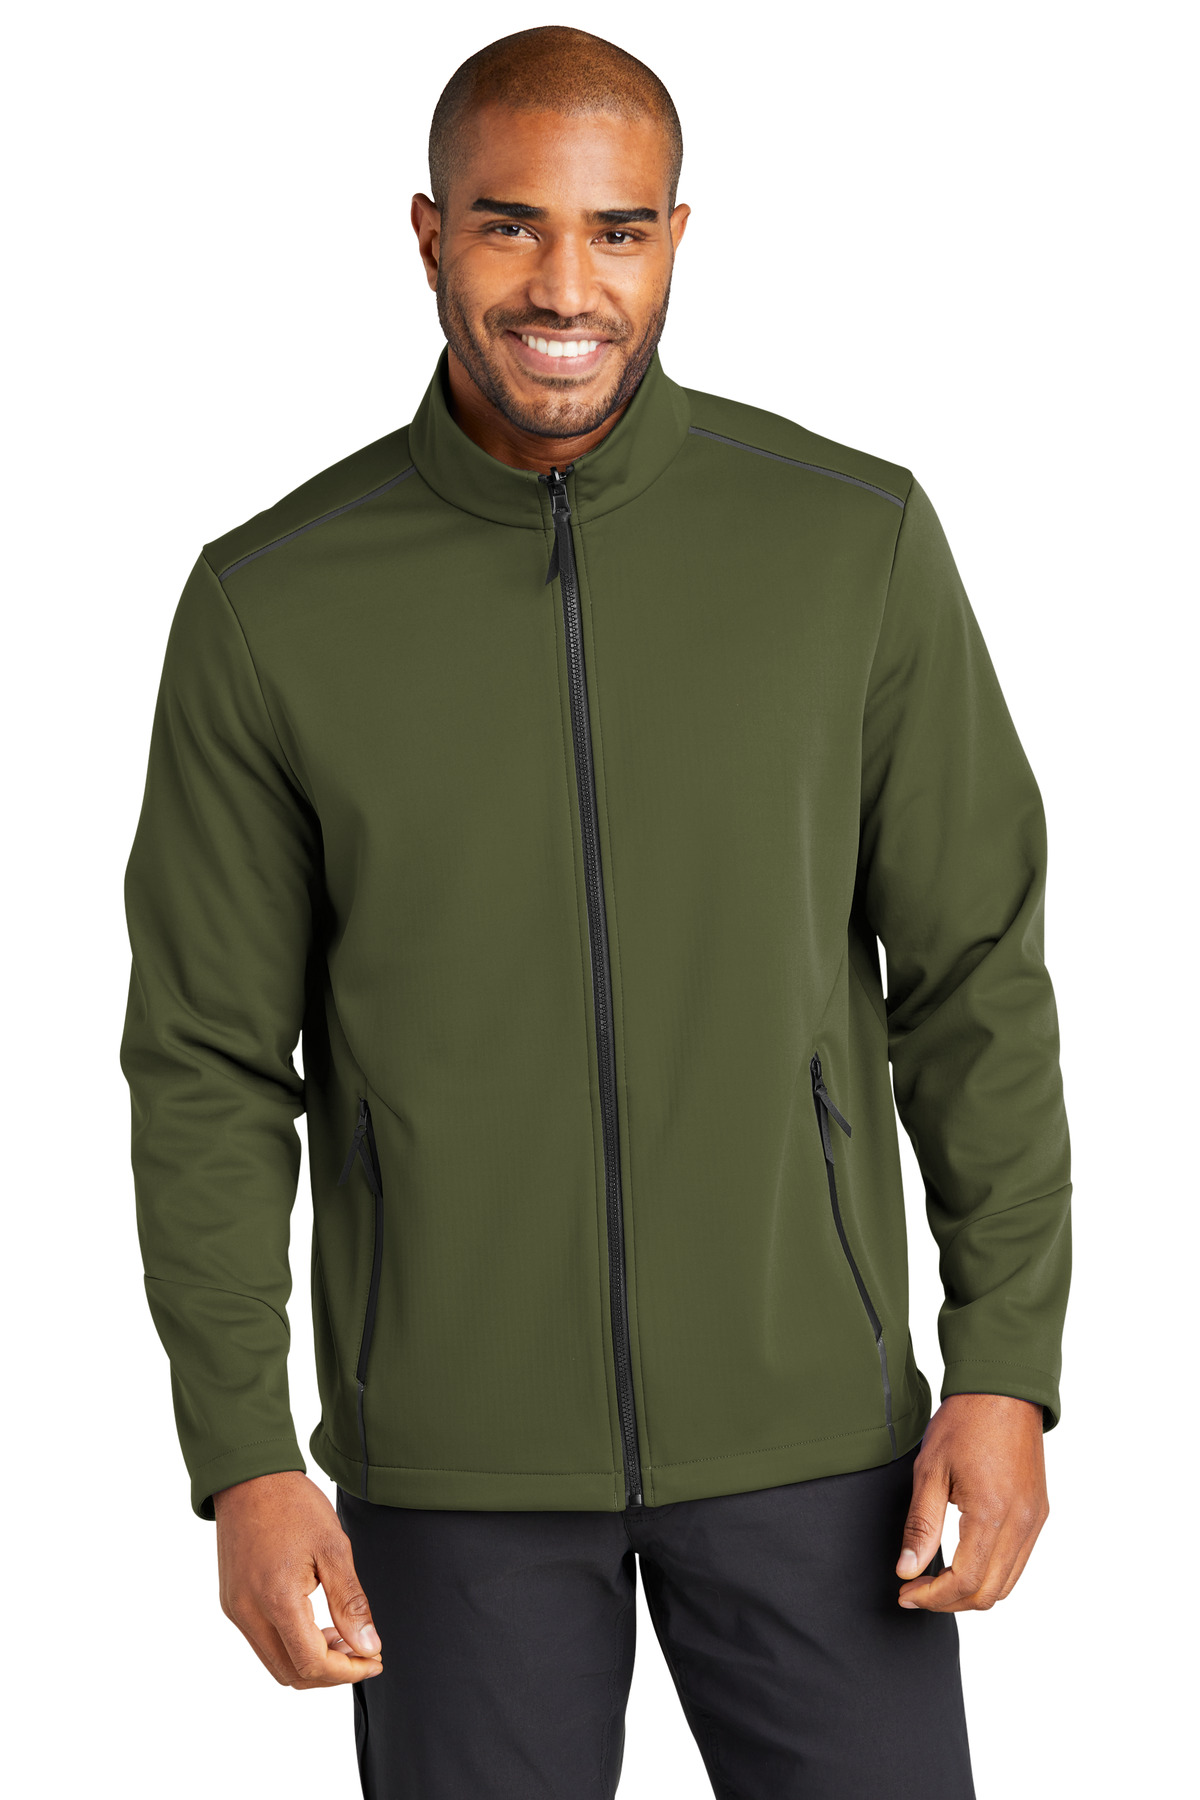 Port Authority Collective Tech Soft Shell Jacket-Port Authority